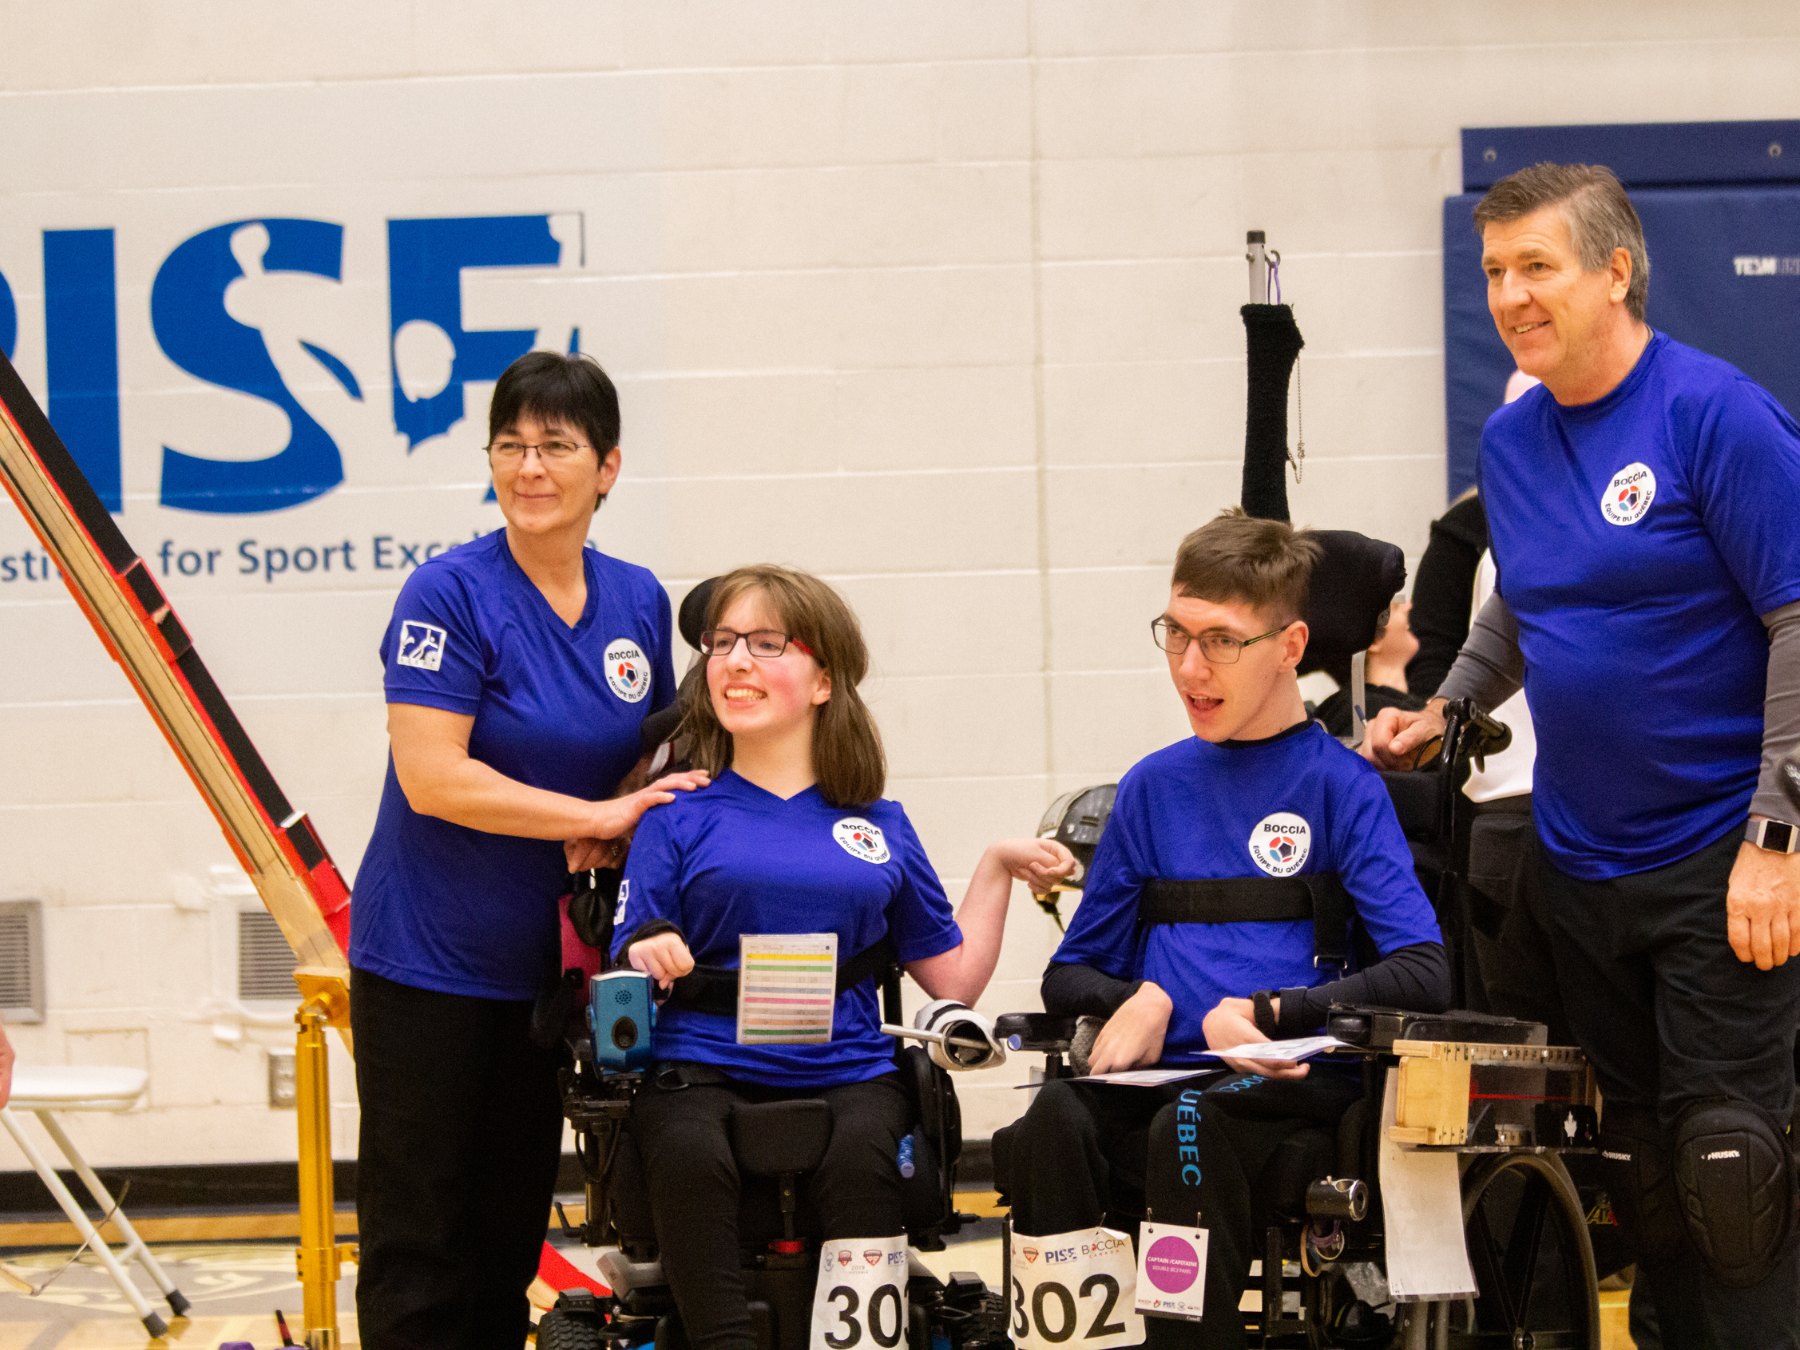 Marylou Martineau, Philippe Lord and their performance partners at 27th Canadian Boccia Championships | Marylou Martineau, Philippe Lord et leurs partenaires de performance au 27e Championnat canadien de boccia